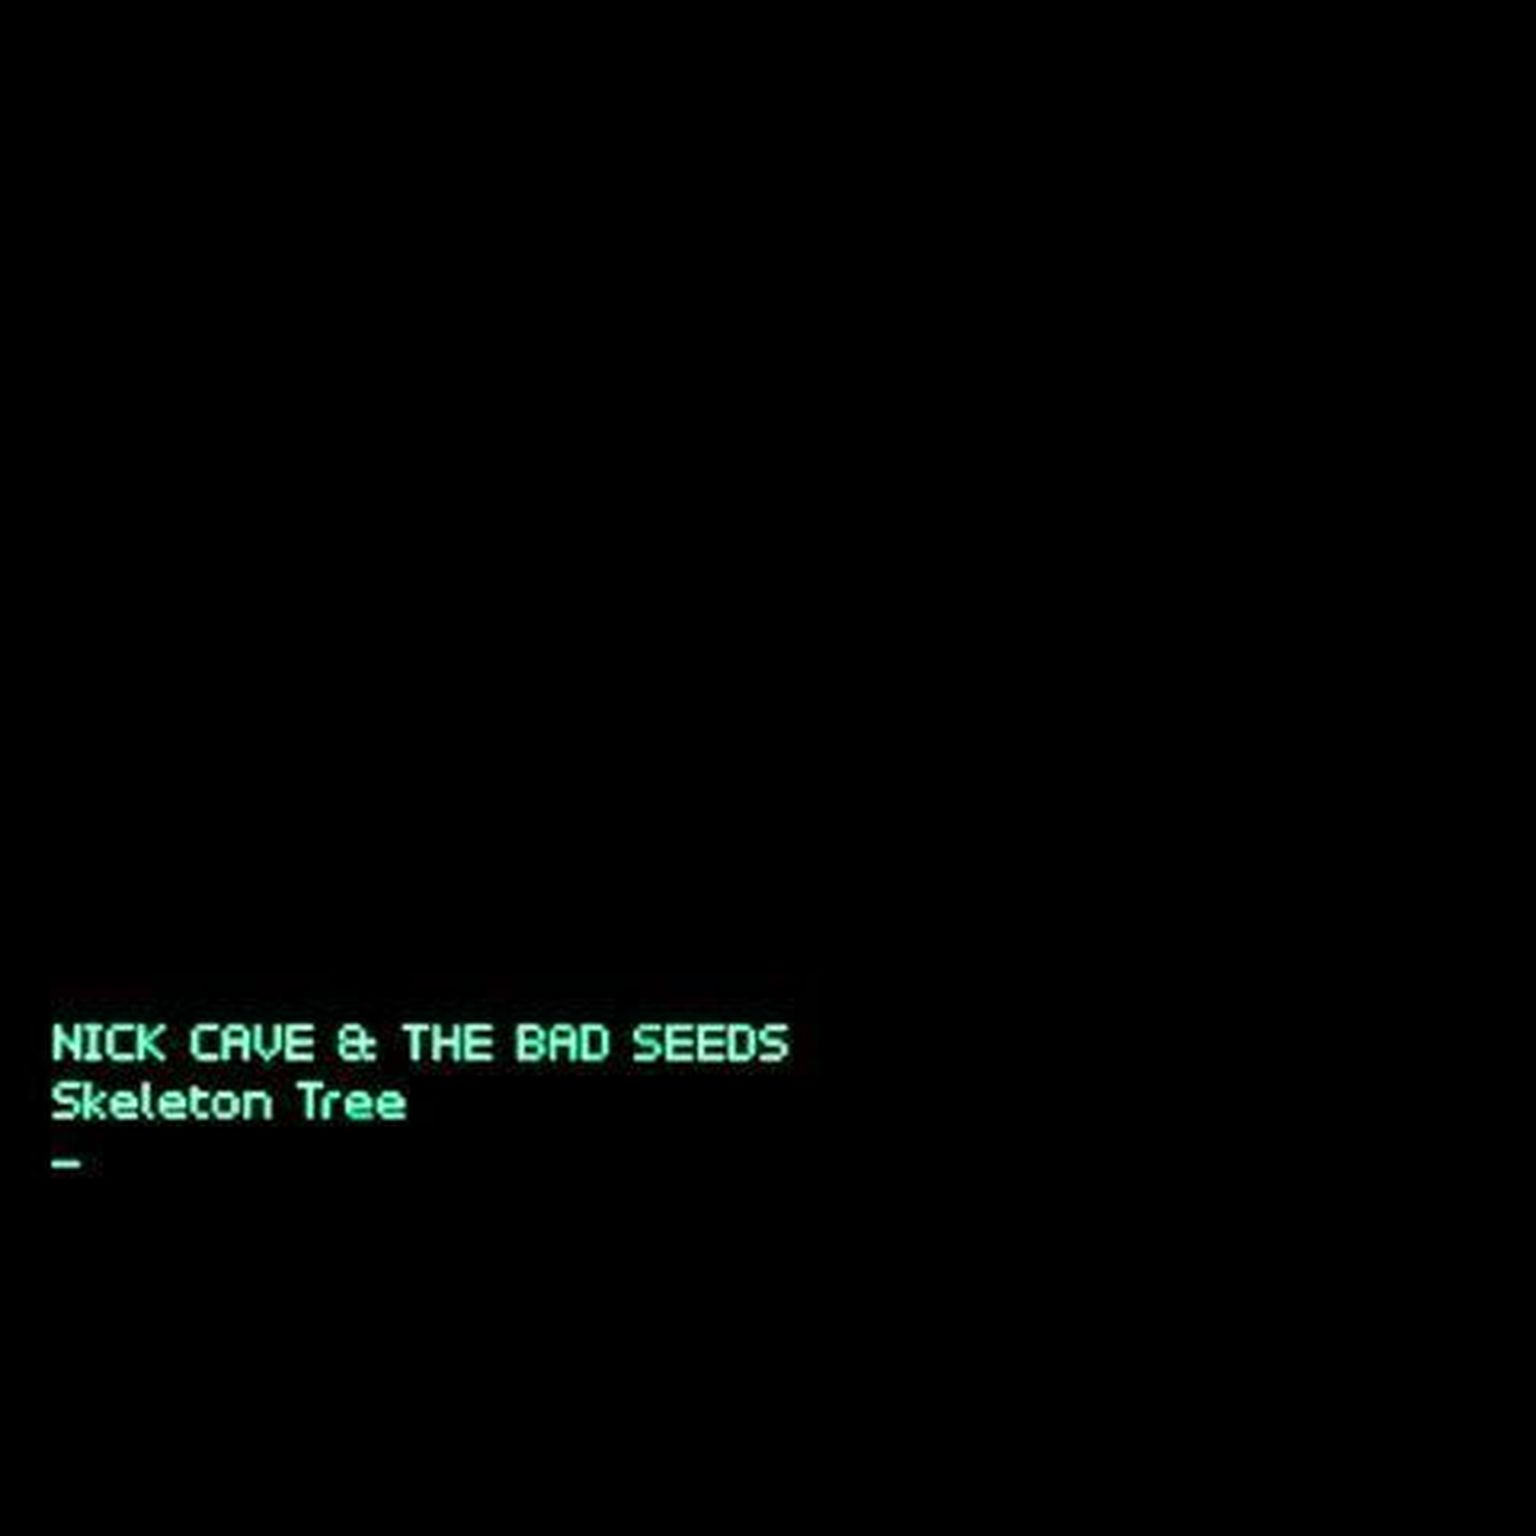 Nick Cave and the Bad Seeds- Skeleton Tree